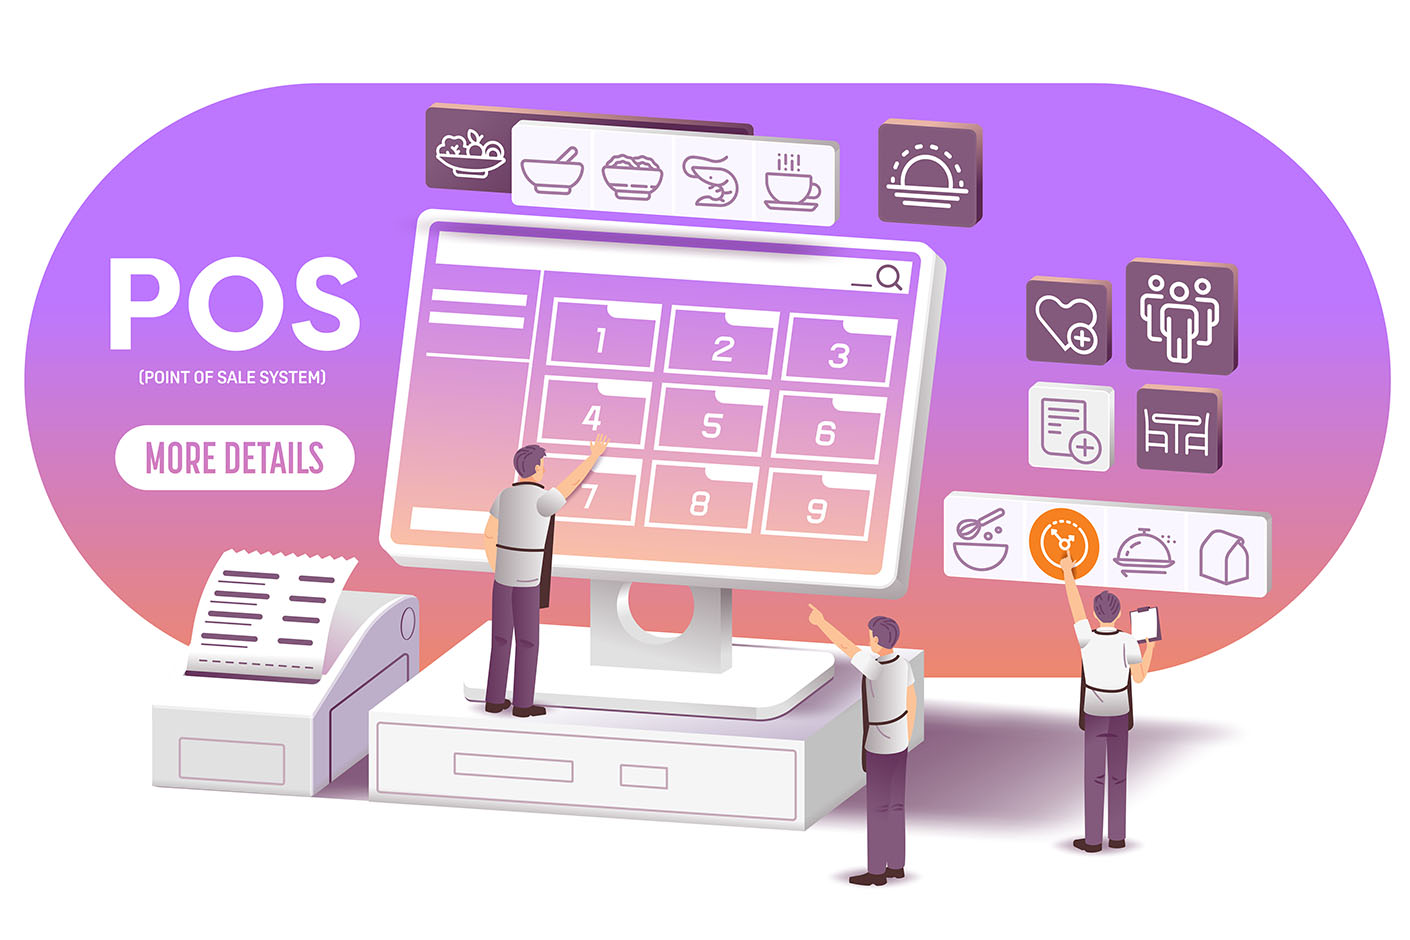 What can POS data be used for?